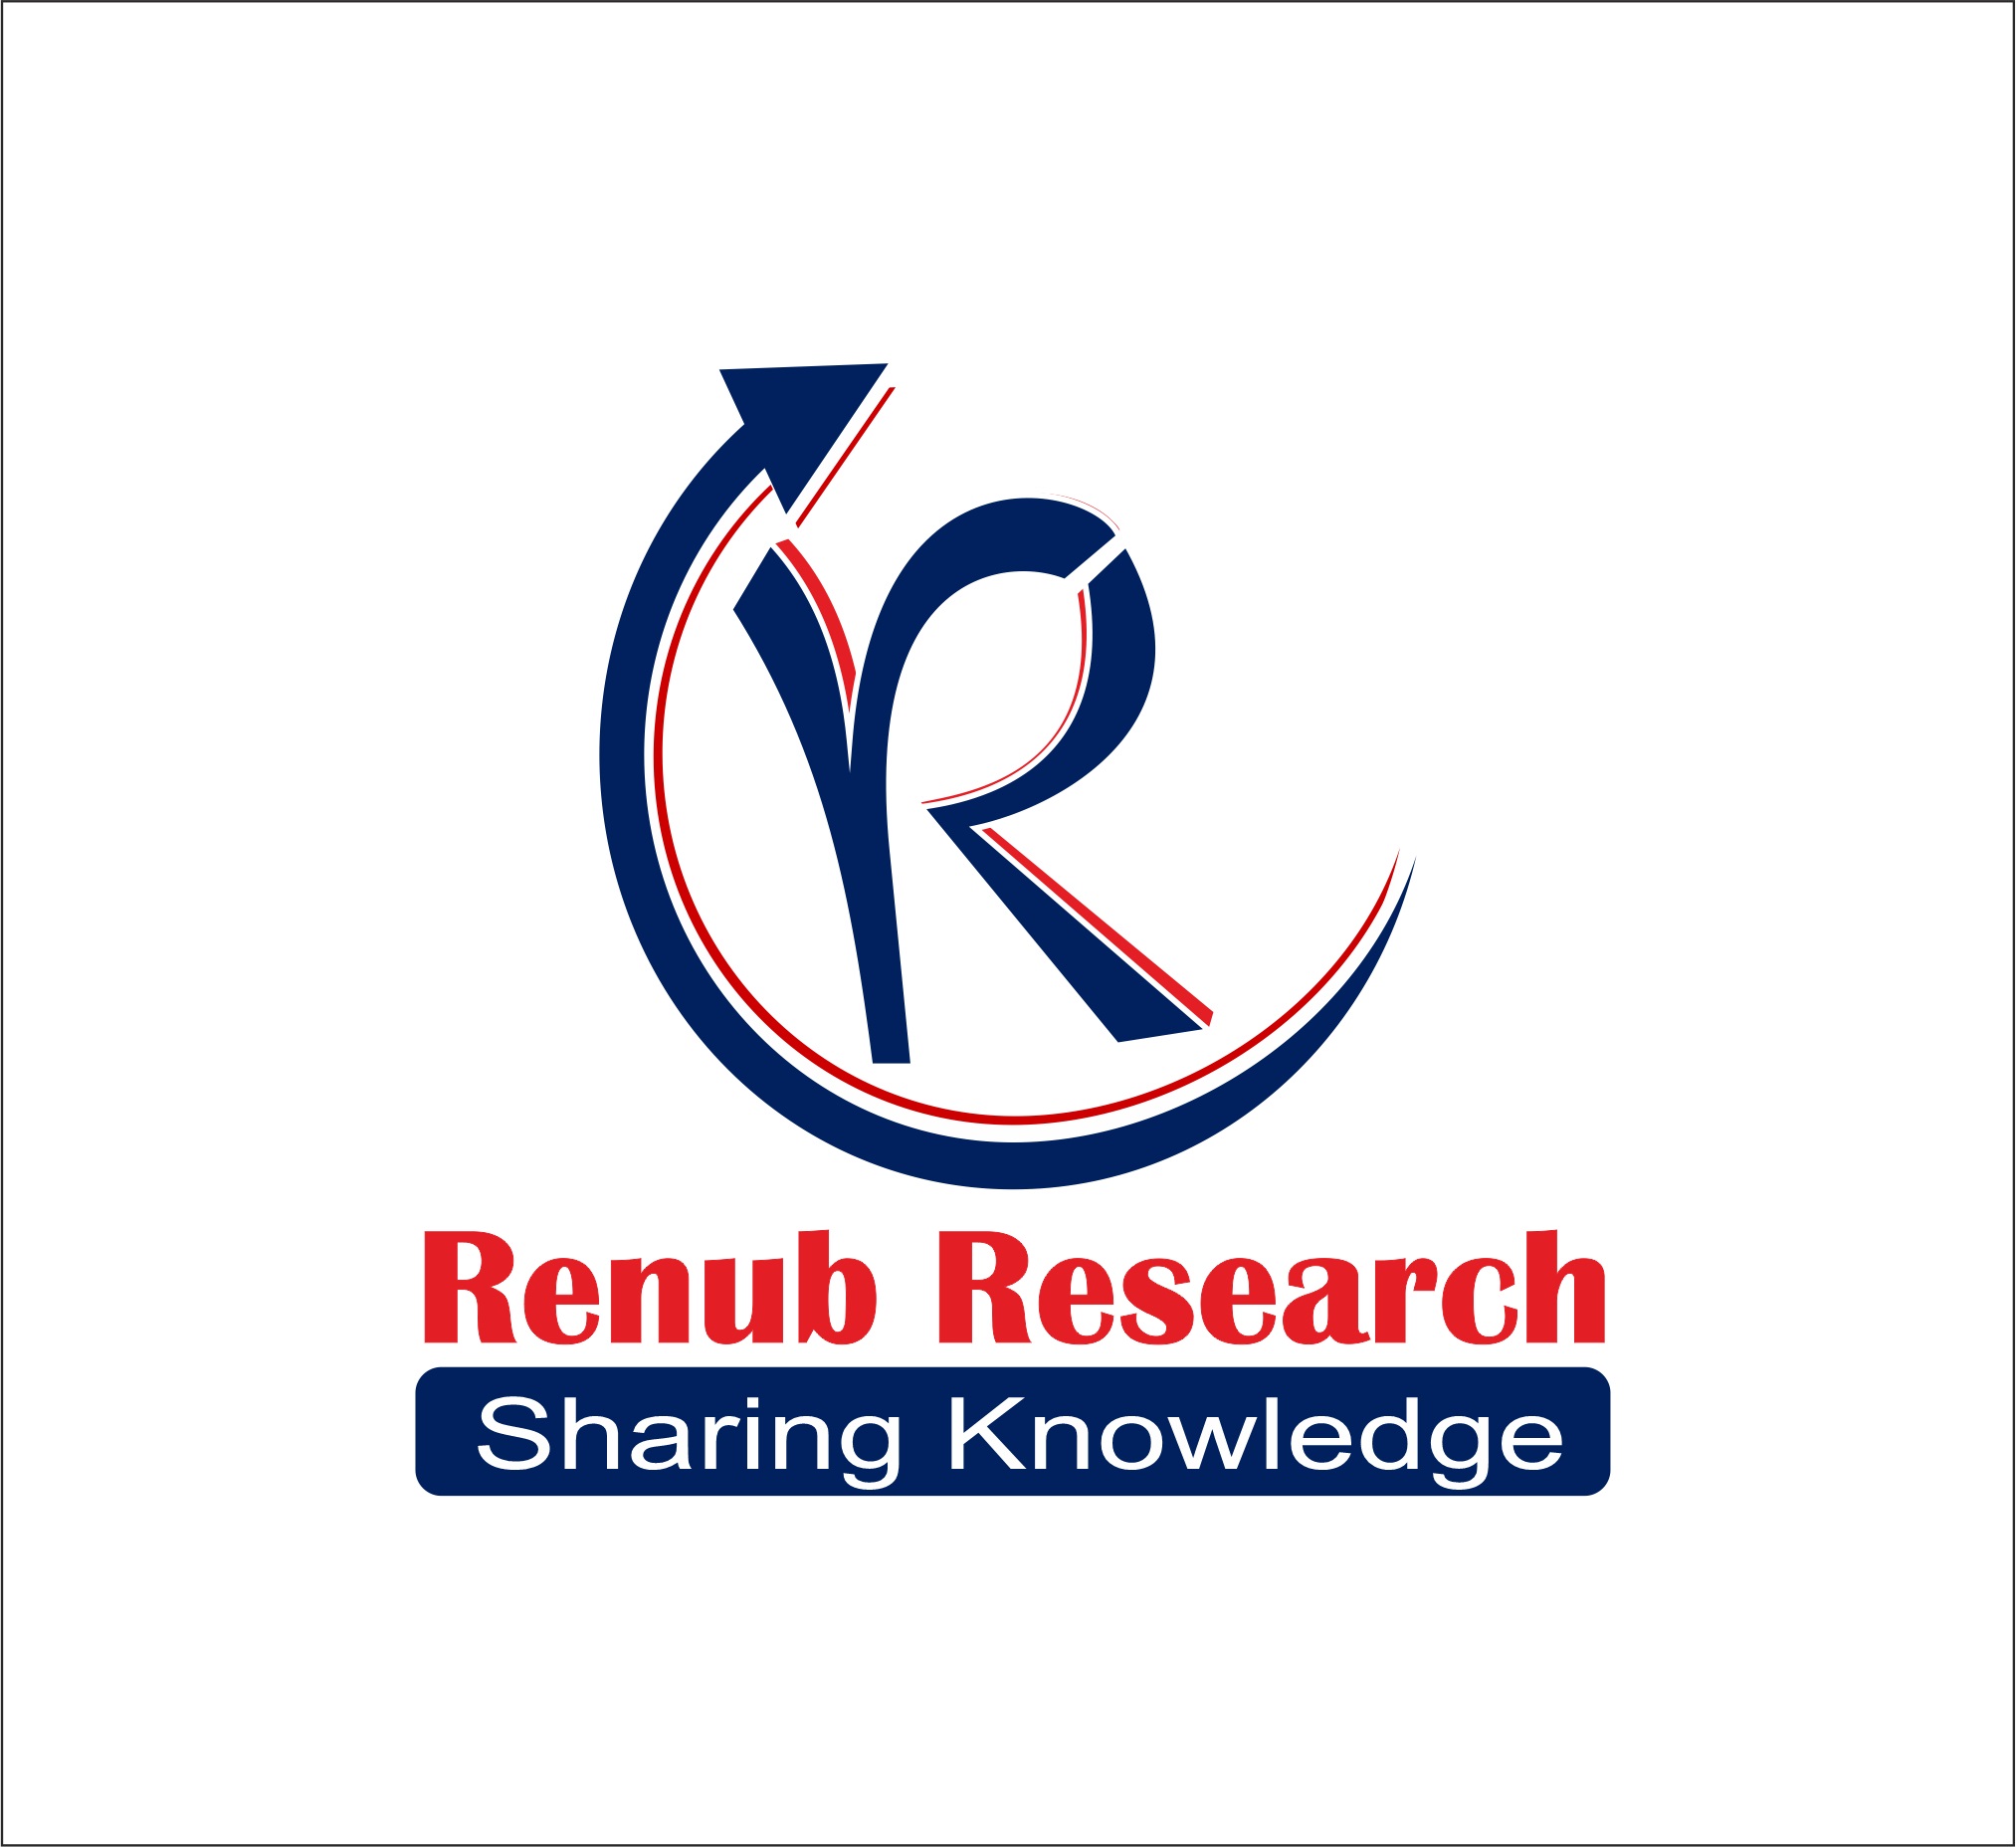 Global Online Education Market is anticipated to reach US$ 350 Billion Mark by the end of the year 2025 - Renub Research